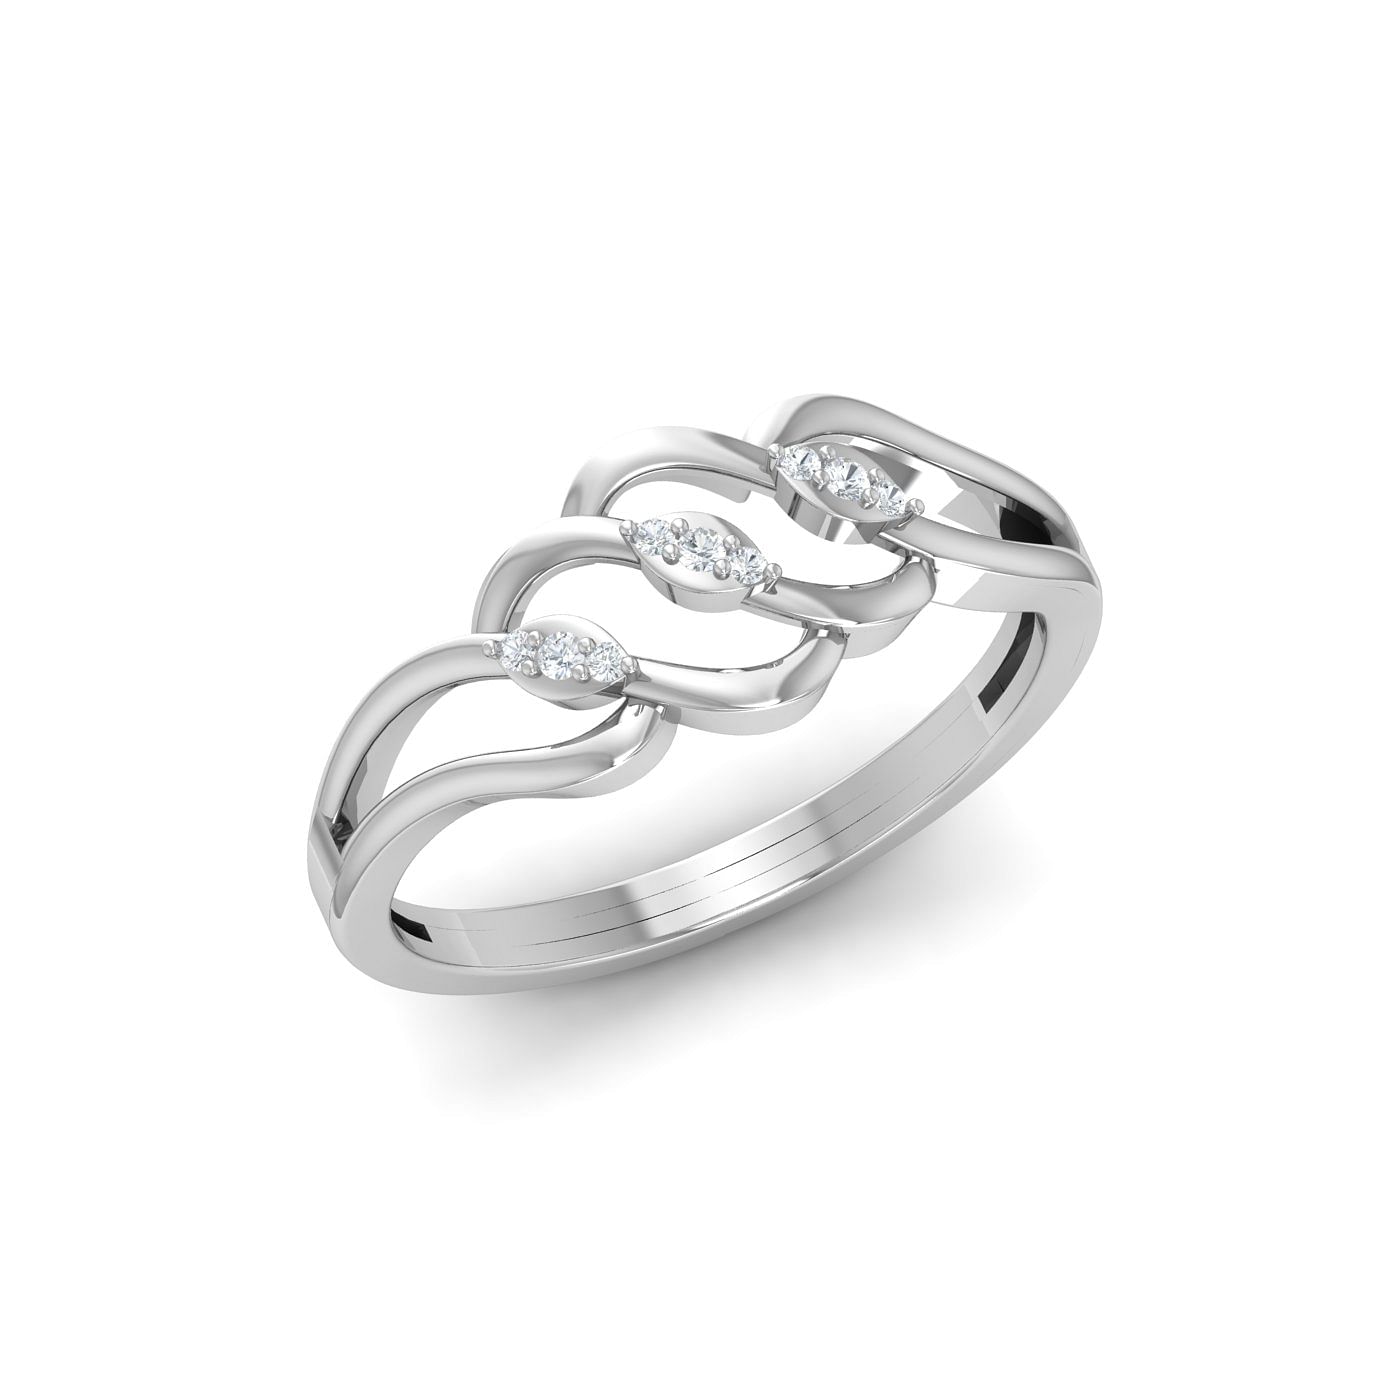 white gold ring designs latest